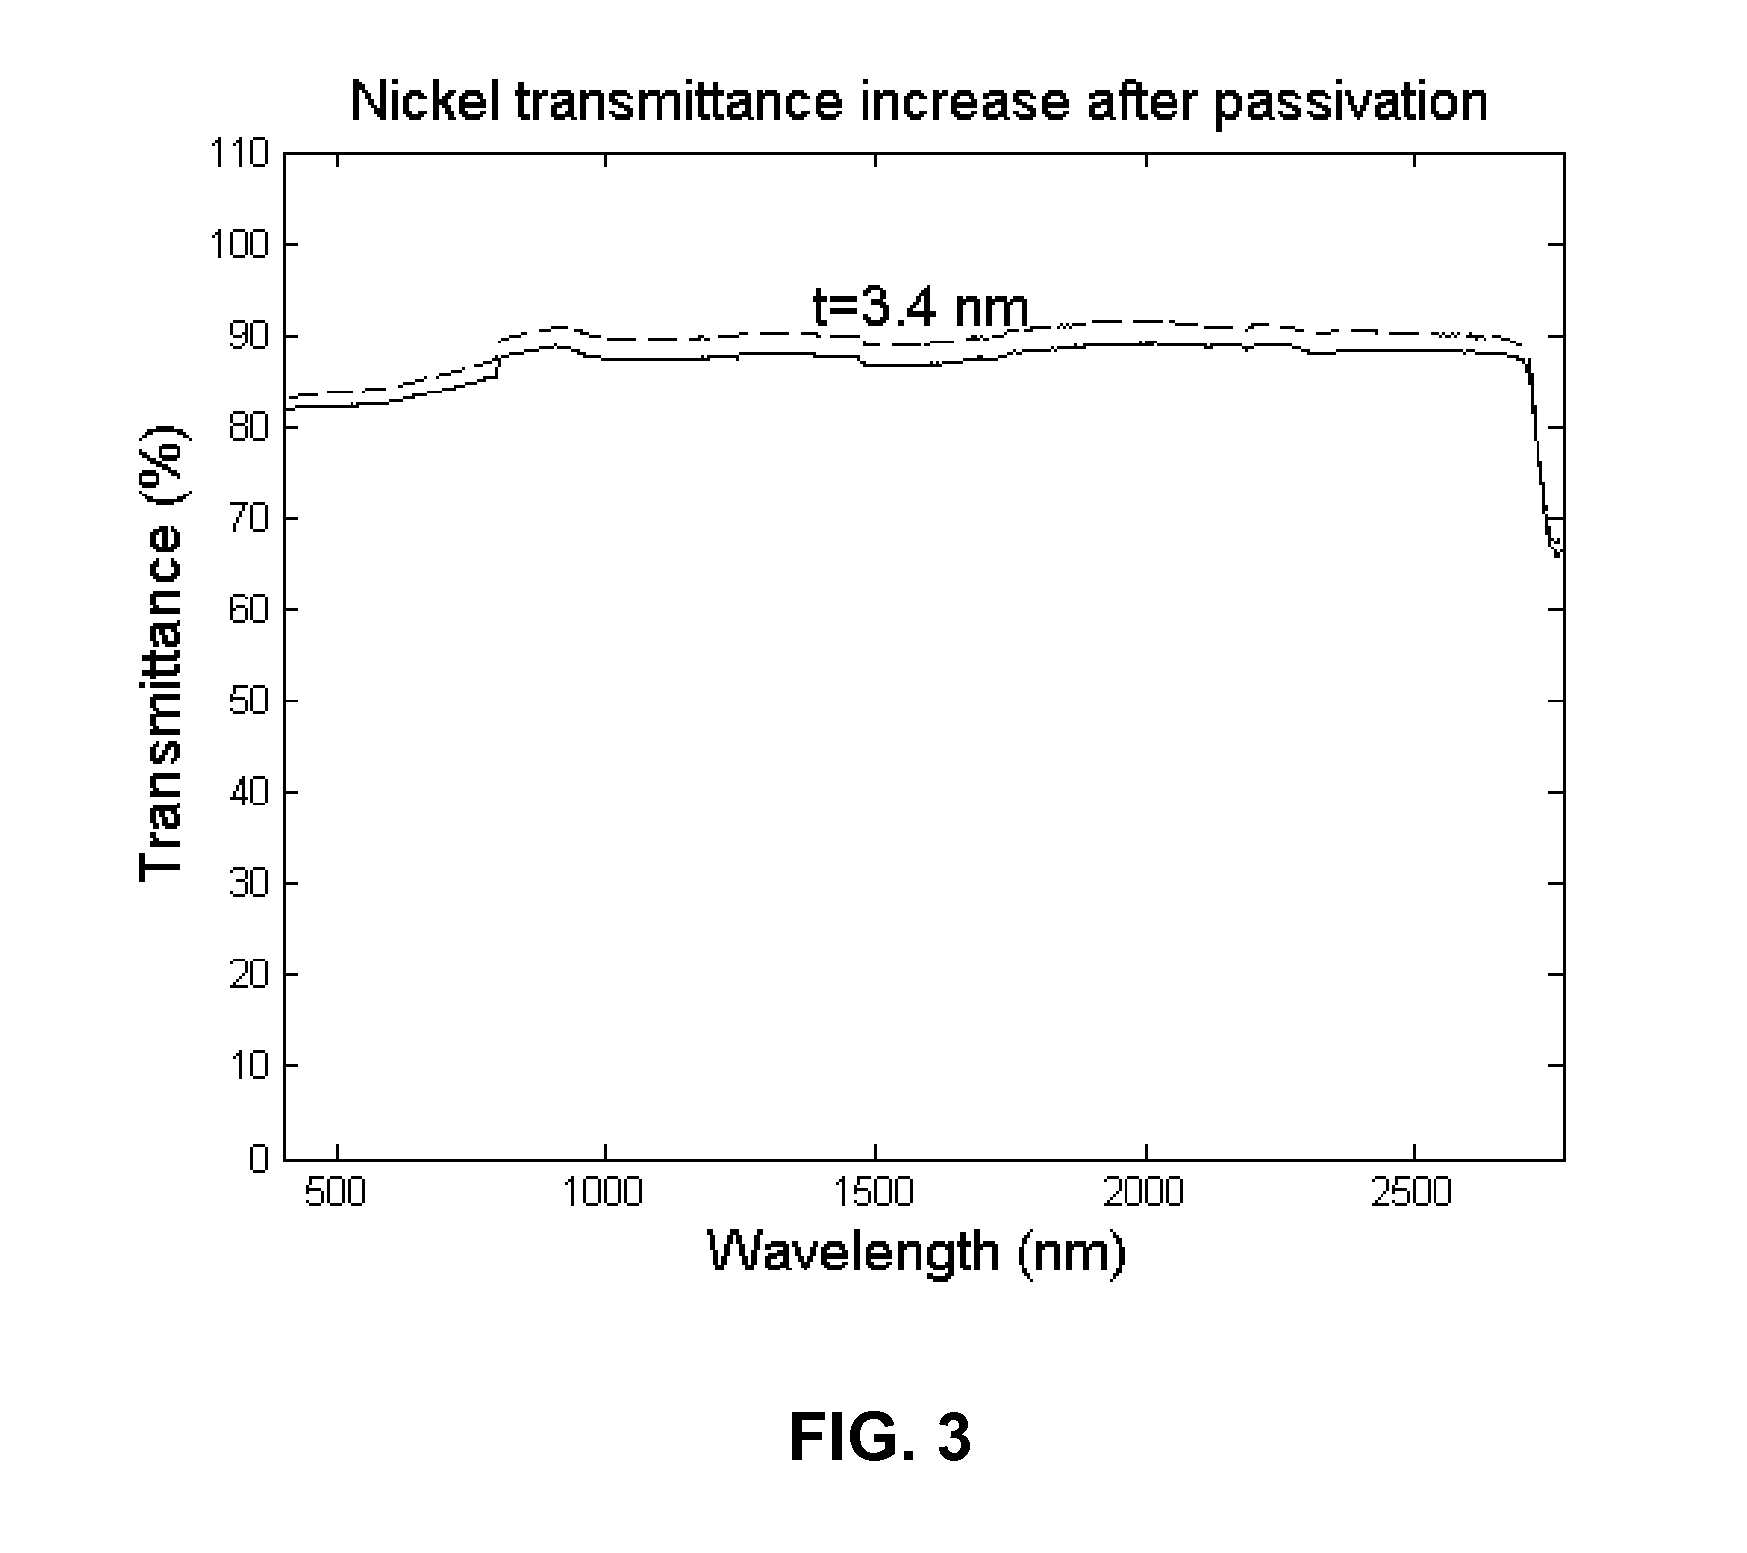 Method to prepare a stable transparent electrode